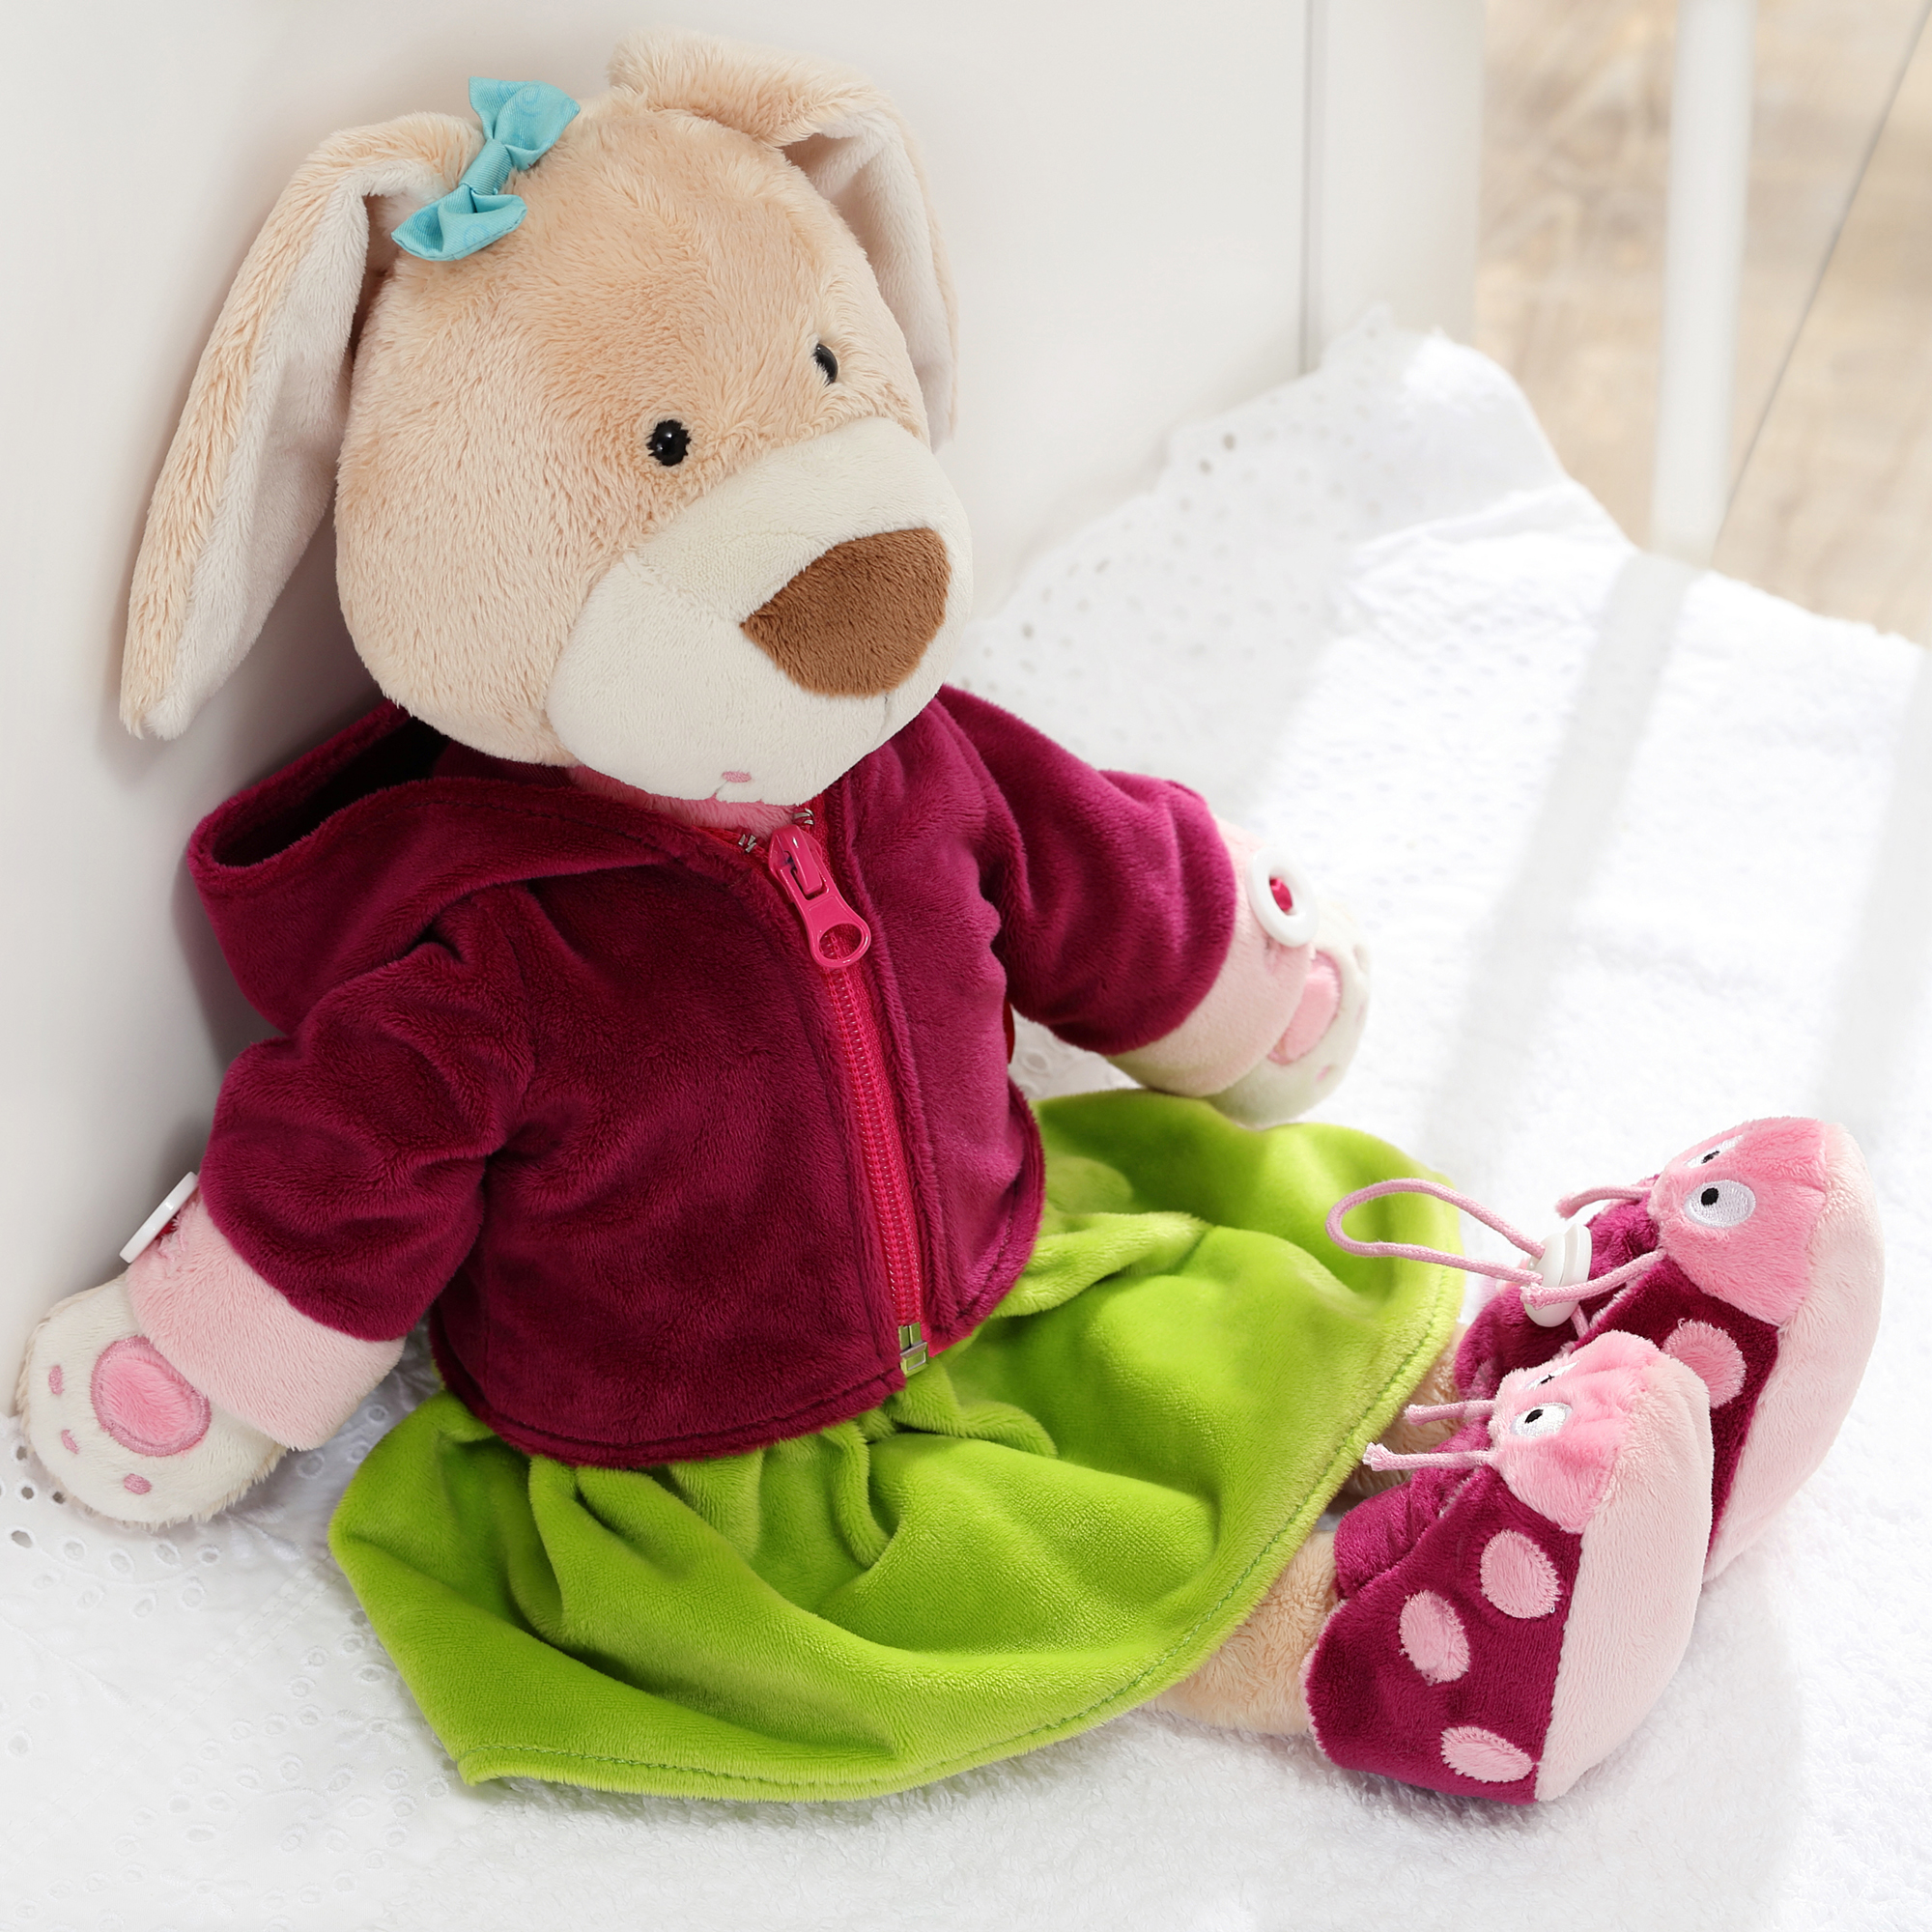 Learn-how-to-dress plush bunny